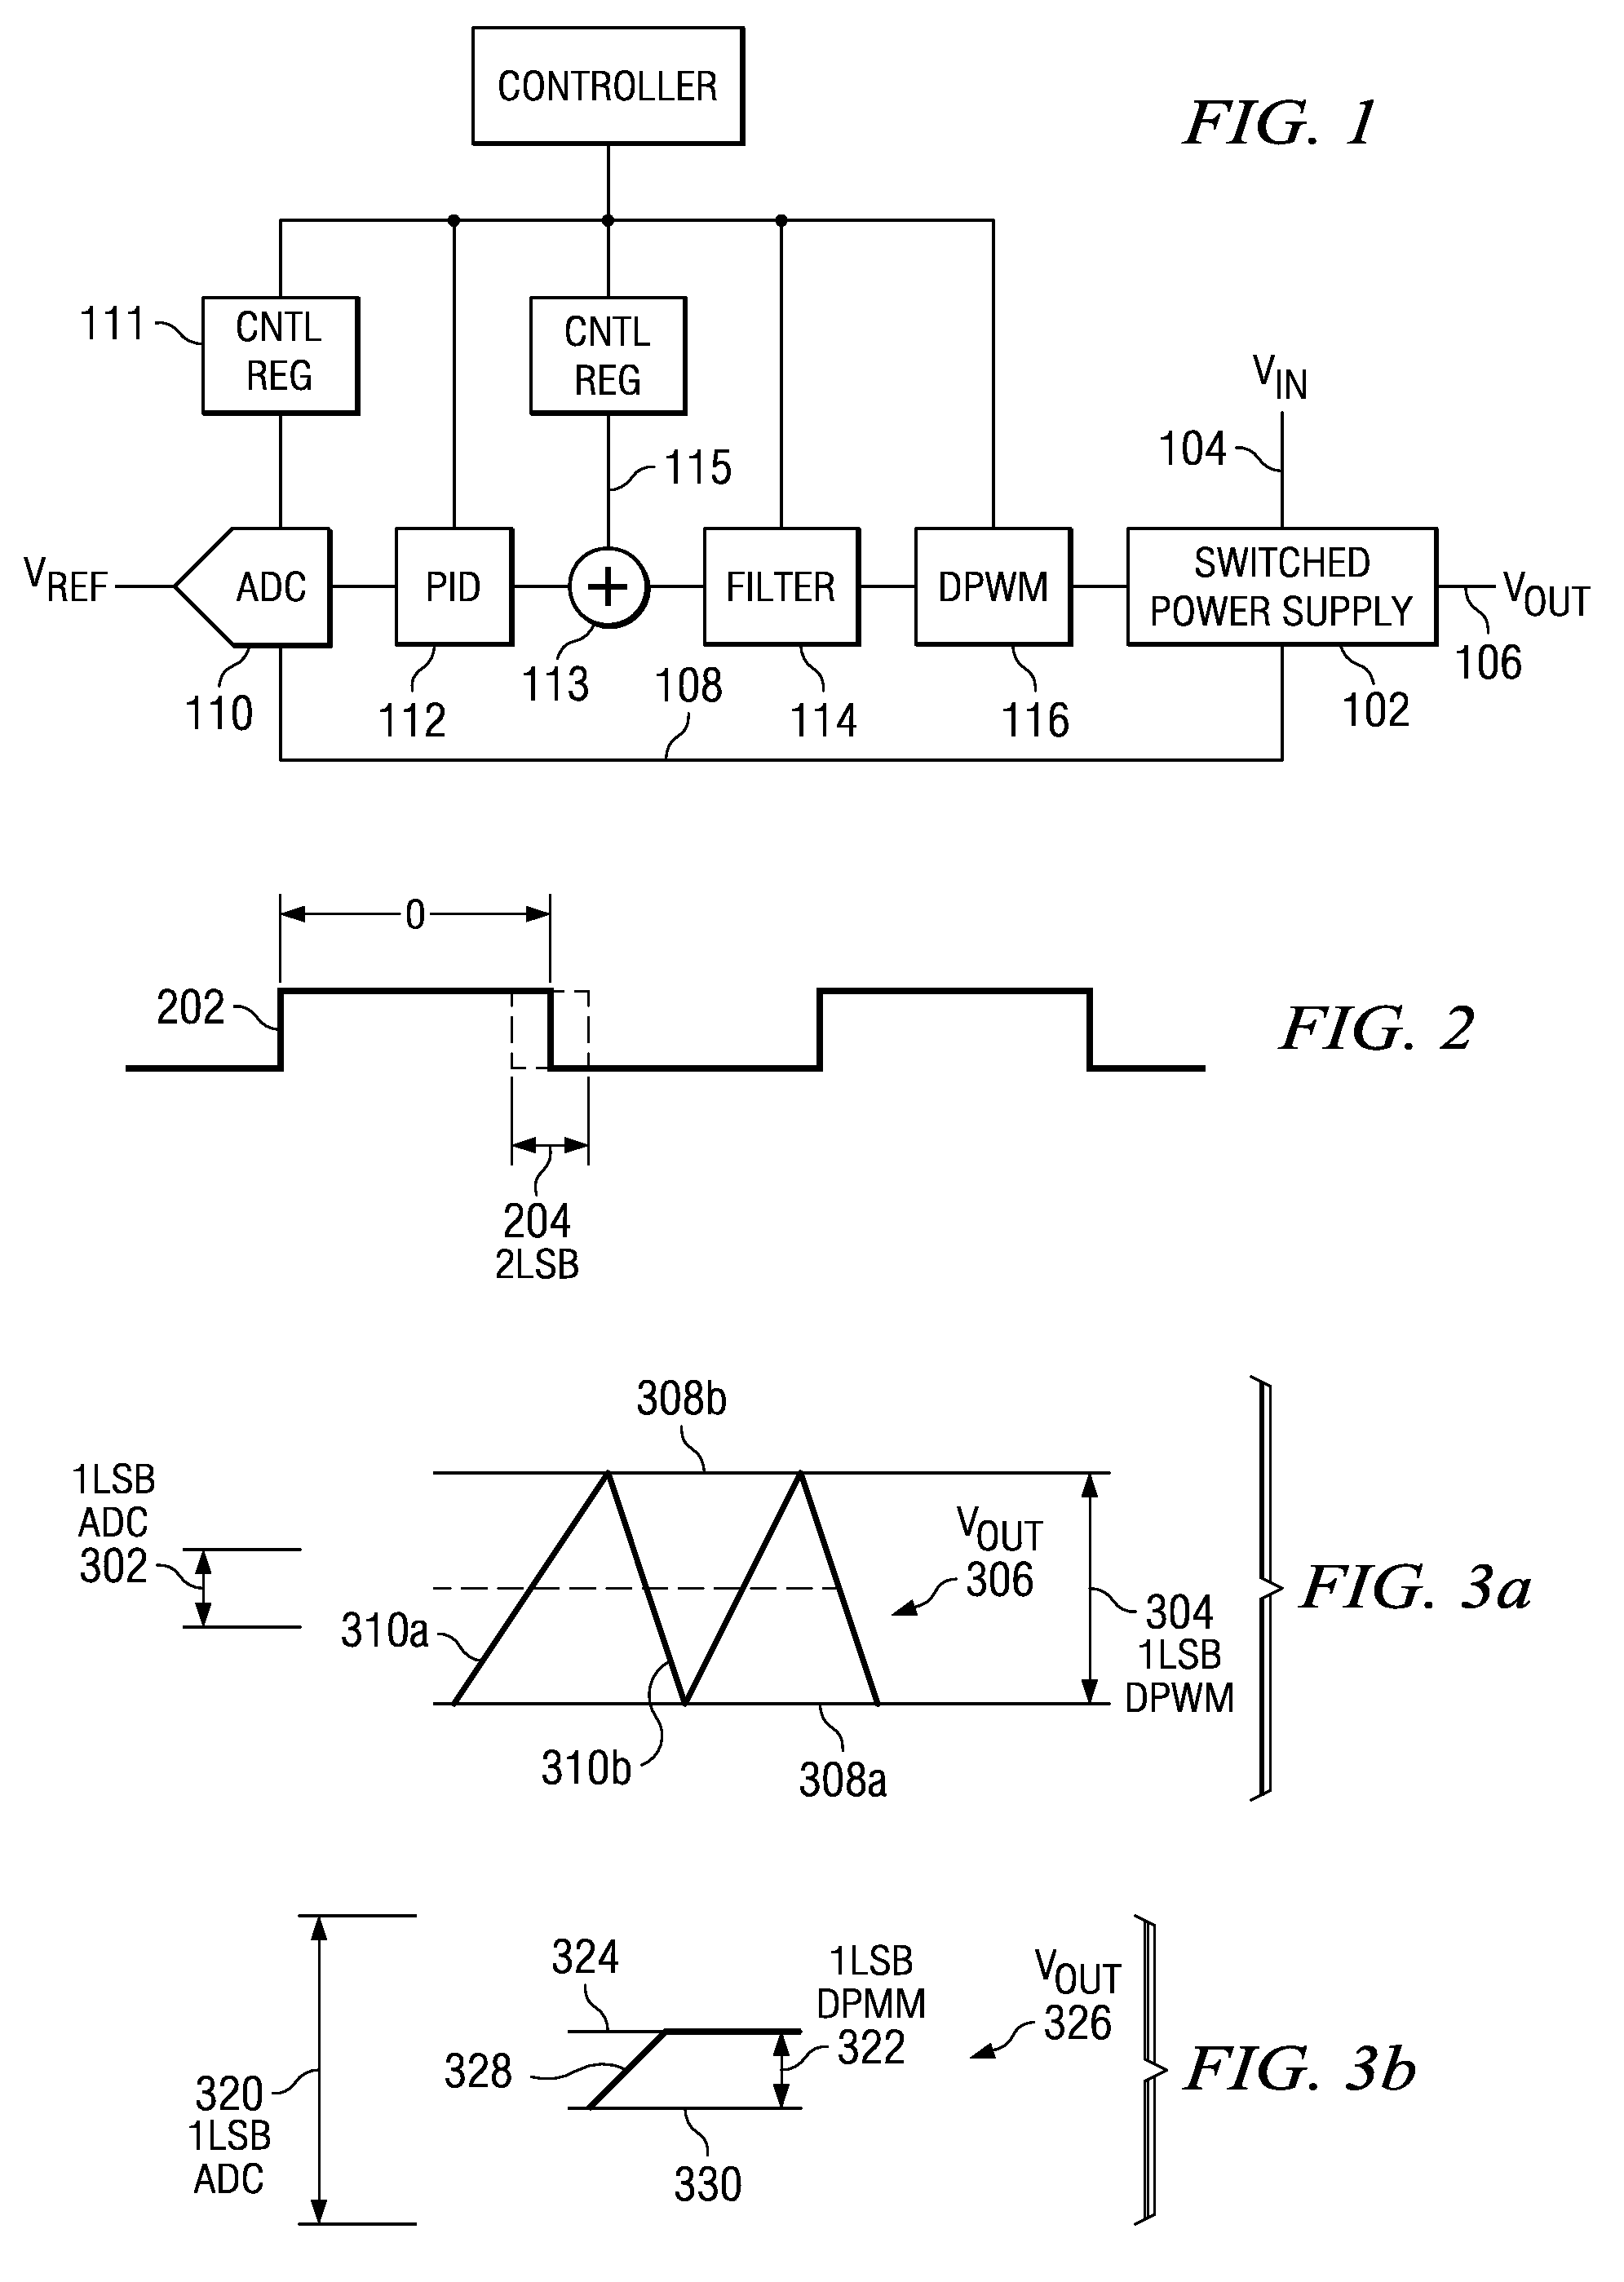 Digital PWM controller for preventing limit cycle oscillations